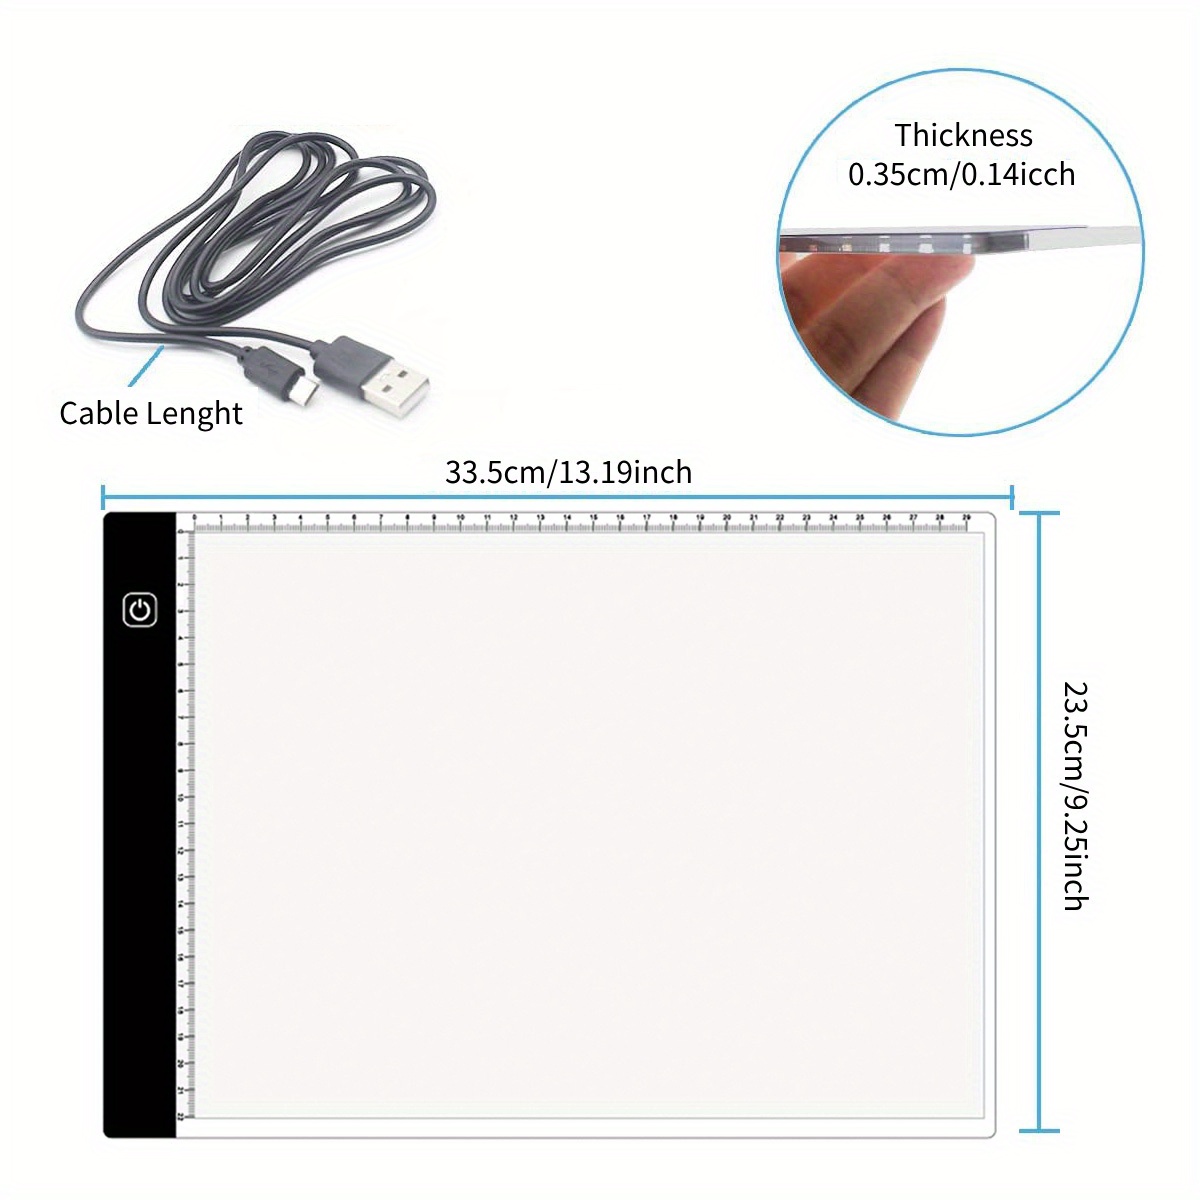 Ultra-Thin A5 Portable LED Light Box Tracer w/USB Cable Dimmable Brightness  LED Artcraft Tracing Light Box Light Pad for Artists Drawing Sketching